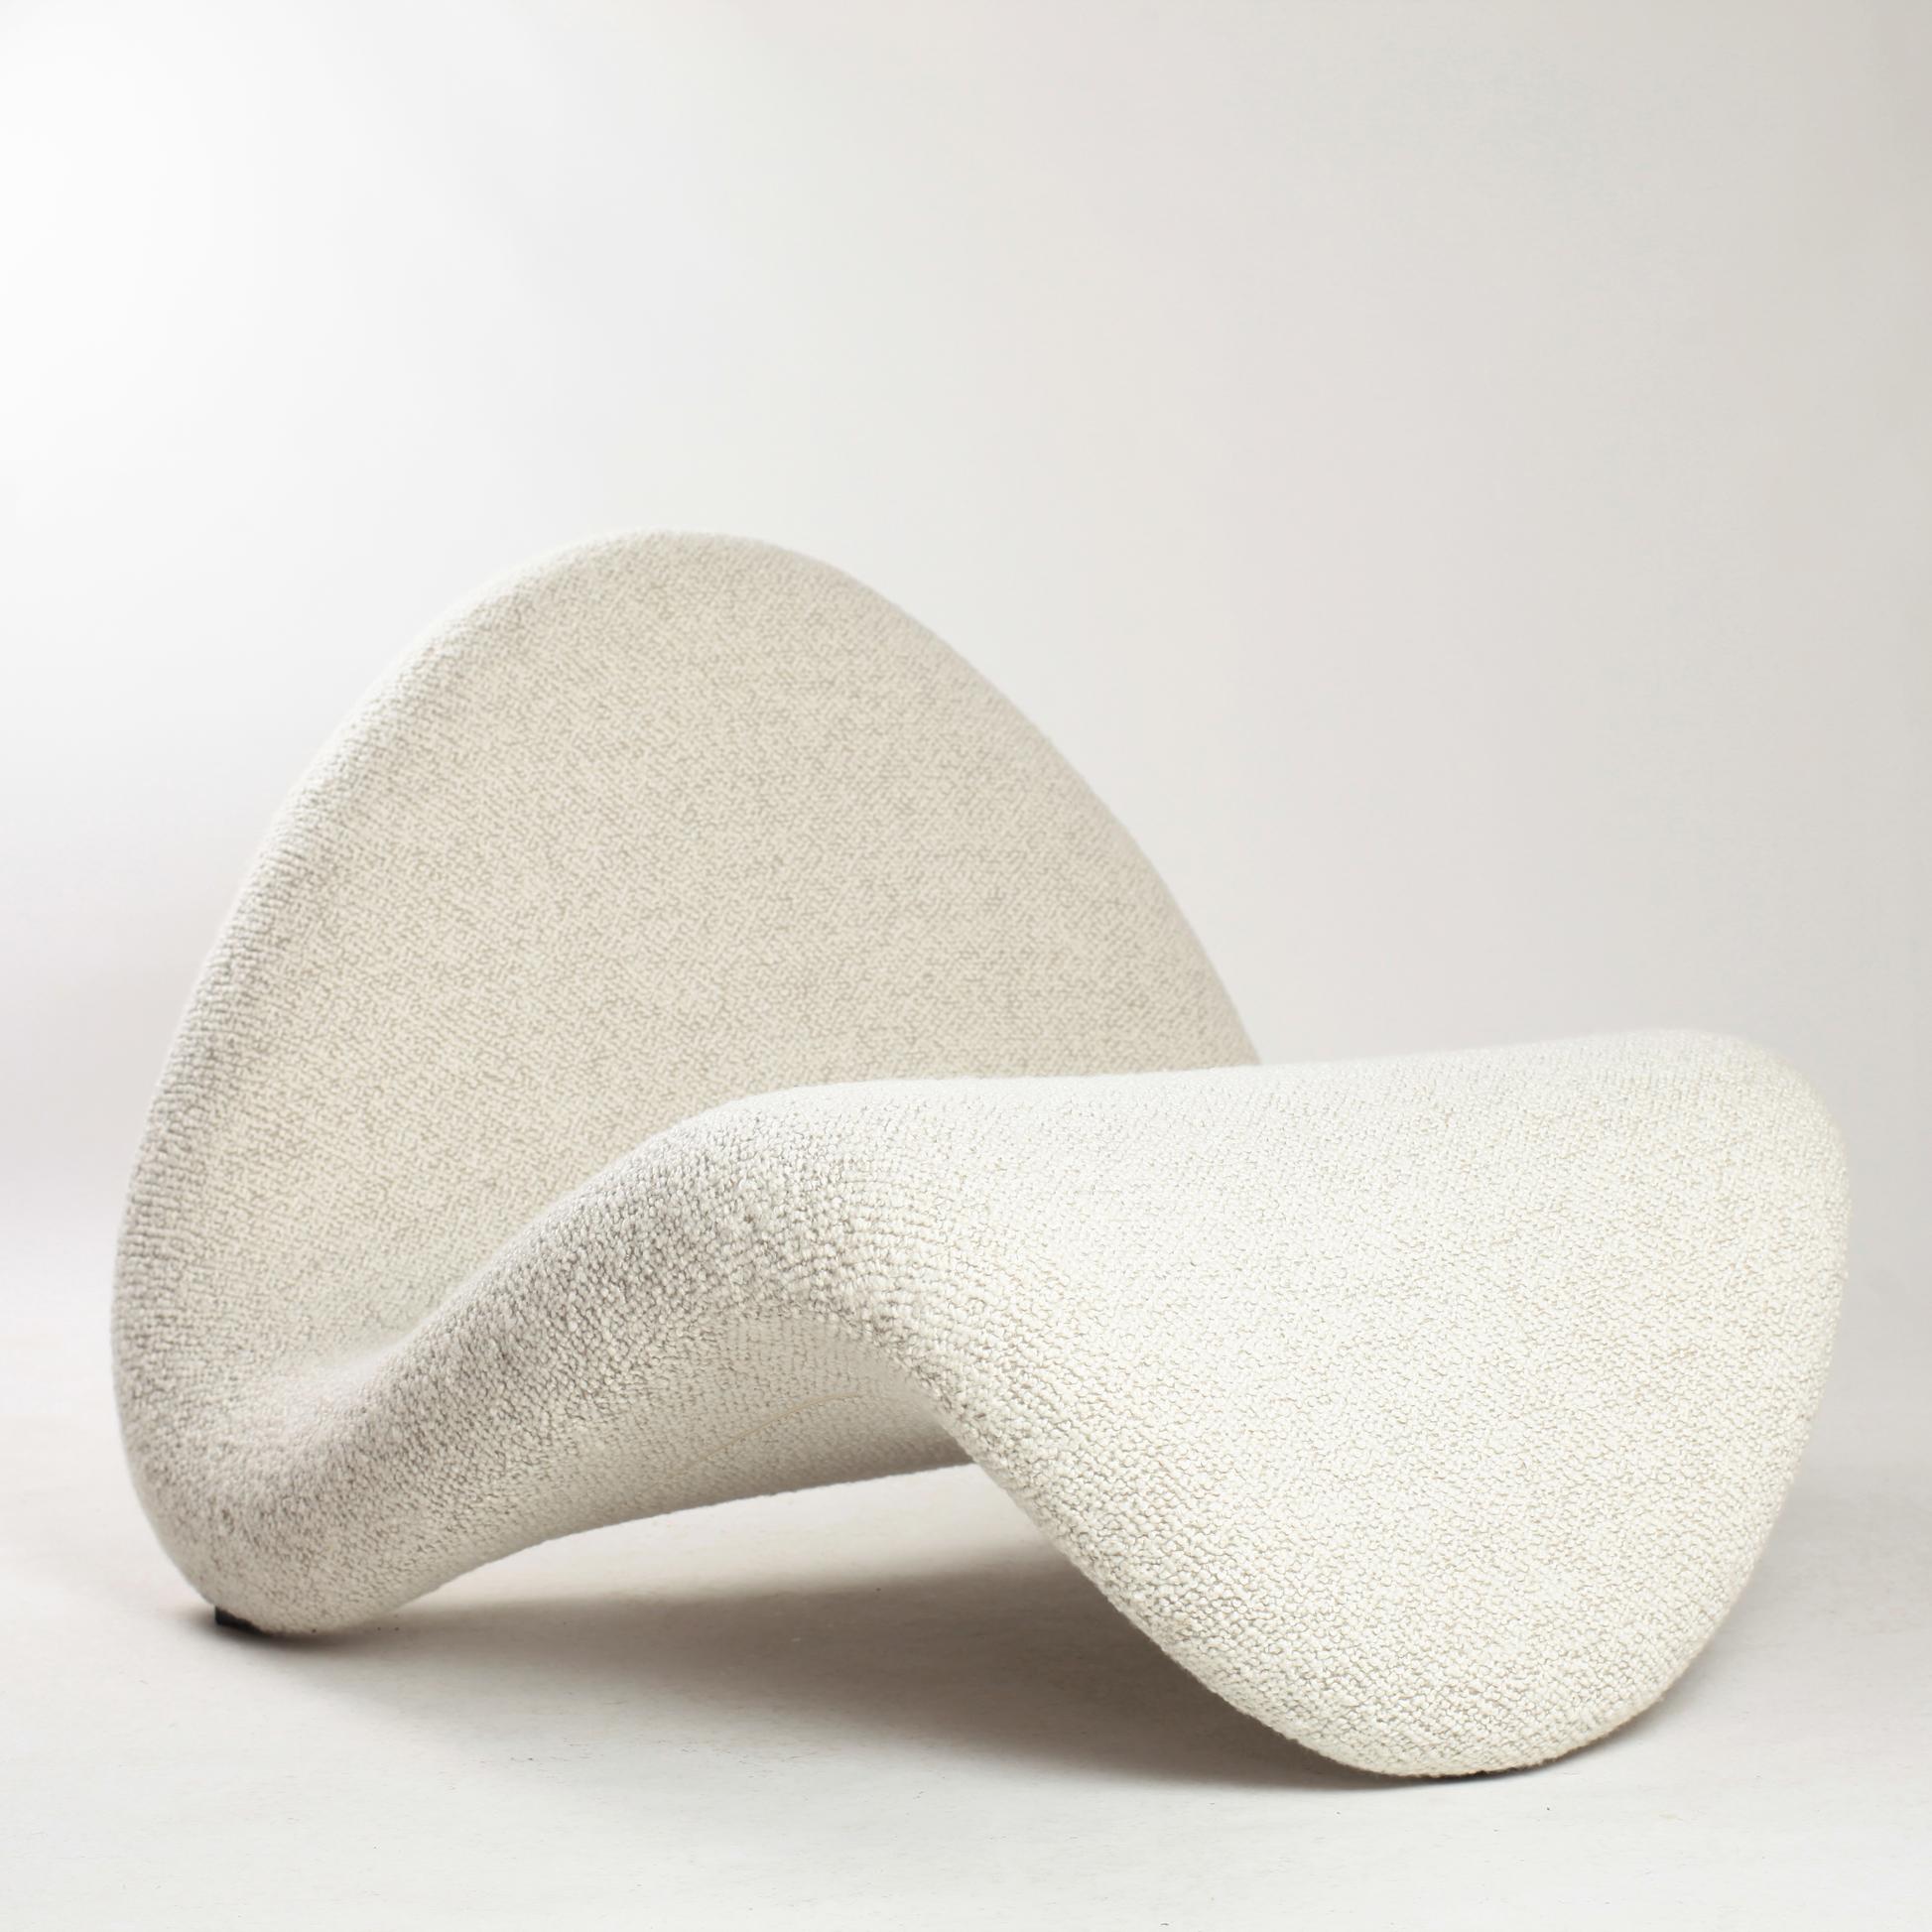 Iconic F577 tongue chair designed by Pierre Paulin for Artifort in the 1960s.
Reupholstered in Pierre Frey Bouclette.